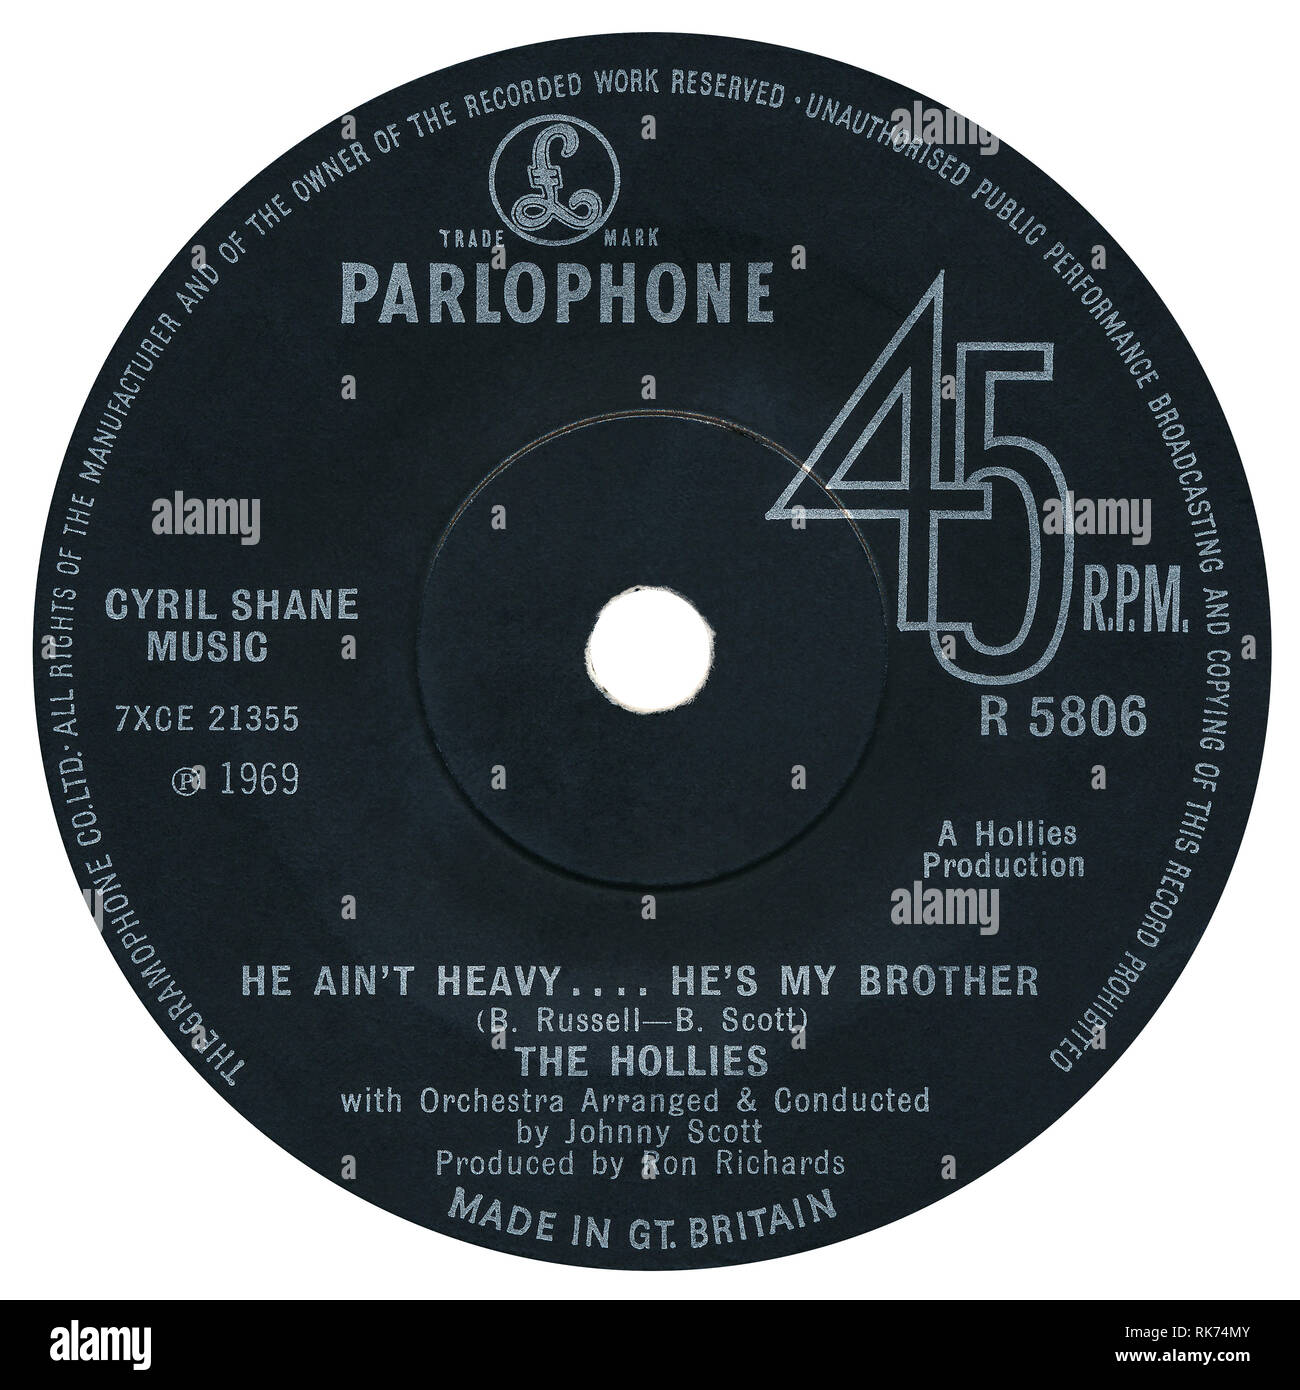 UK 45 rpm single of He Ain't Heavy… He's My Brother by The Hollies on the Parlophone label from 1969. Written by Bobby Scott and Bob Russell, arranged by Johnny Scott and produced by Ron Richards. Stock Photo